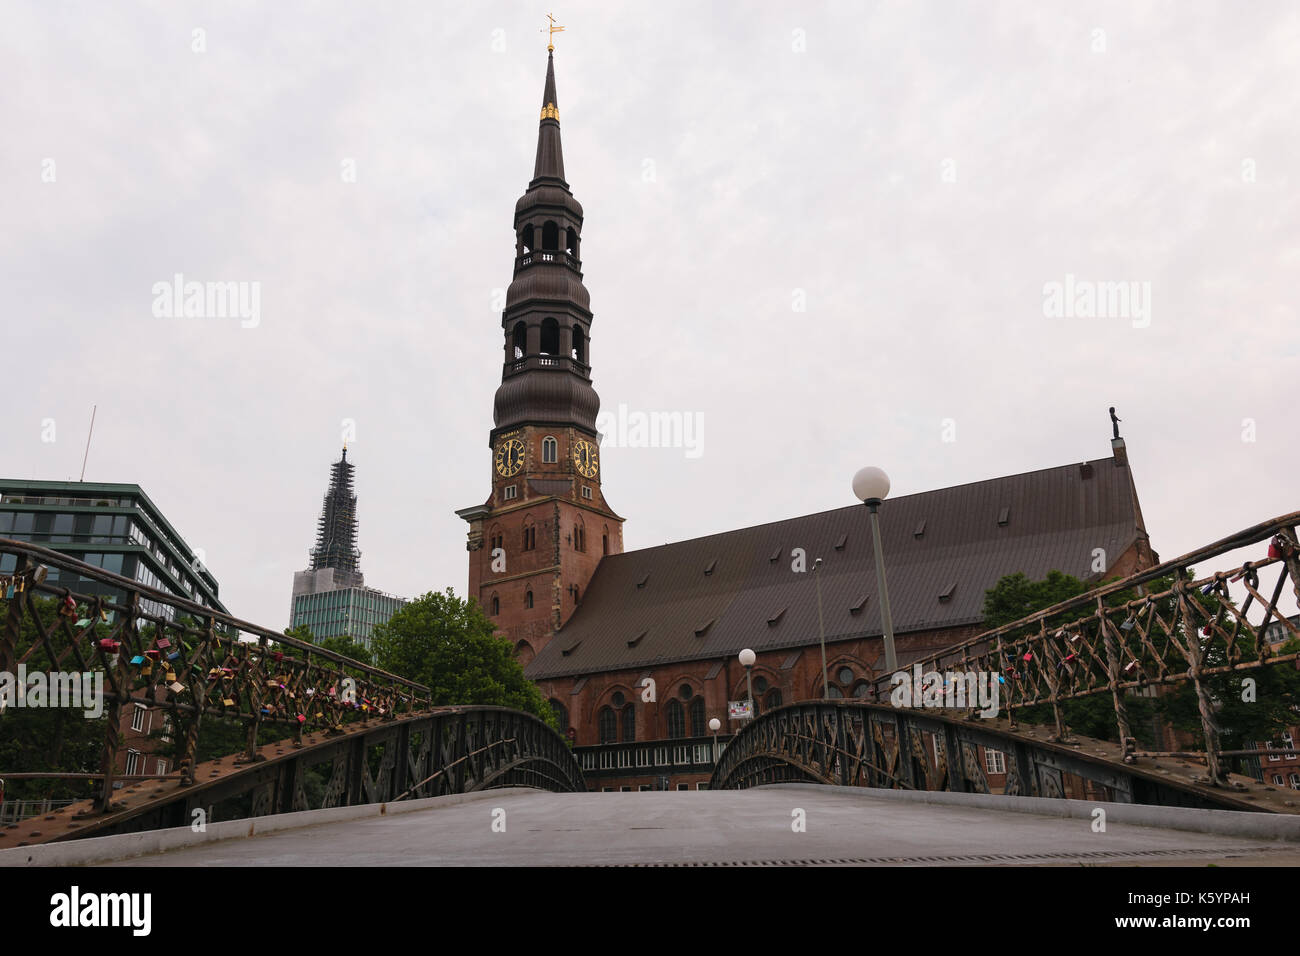 St. Catherine's Church St. Katharinen is one of the five principal Lutheran churches of Hamburg, Germany. Stock Photo